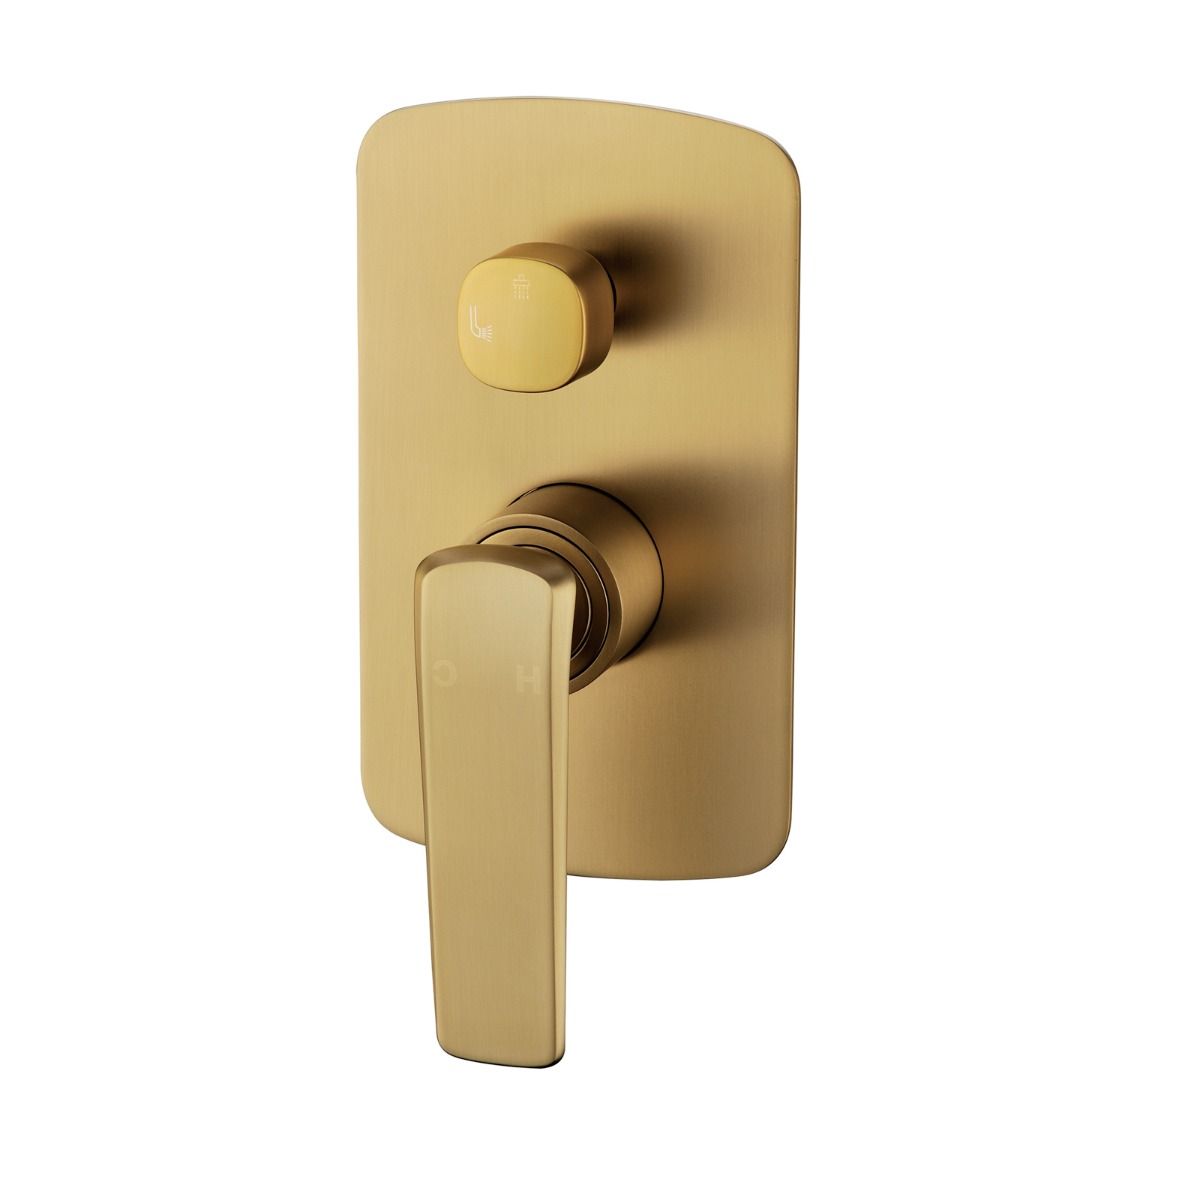 NORICO ESPERIA WALL MIXER WITH DIVERTER BRUSHED YELLOW GOLD